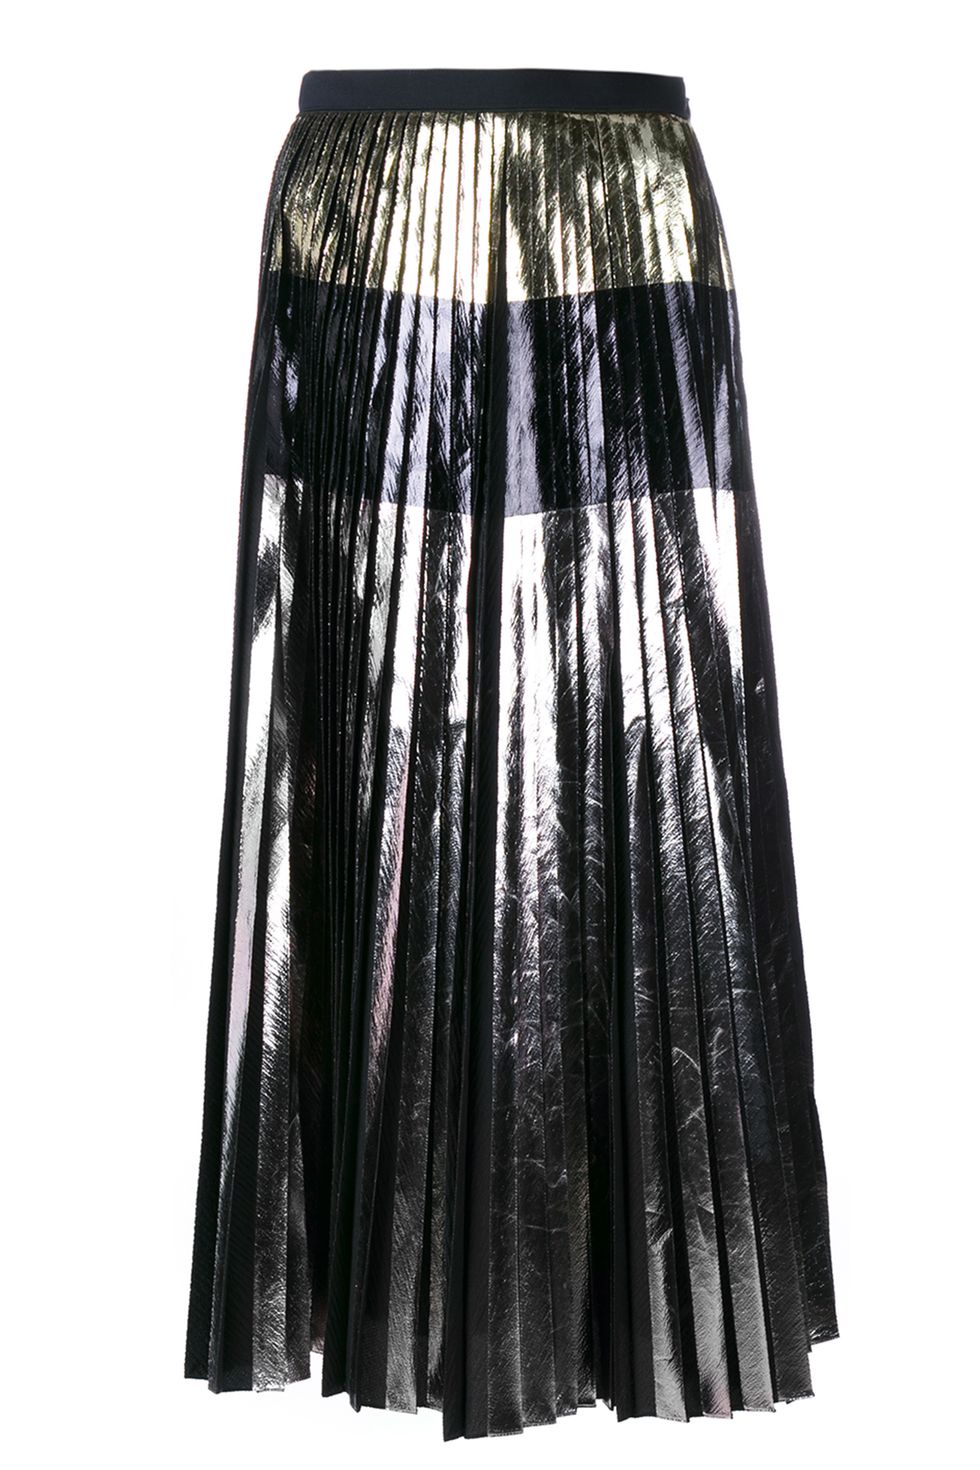 statement skirts, pleated skirts, trophy skirts, best skirts, summer skirts